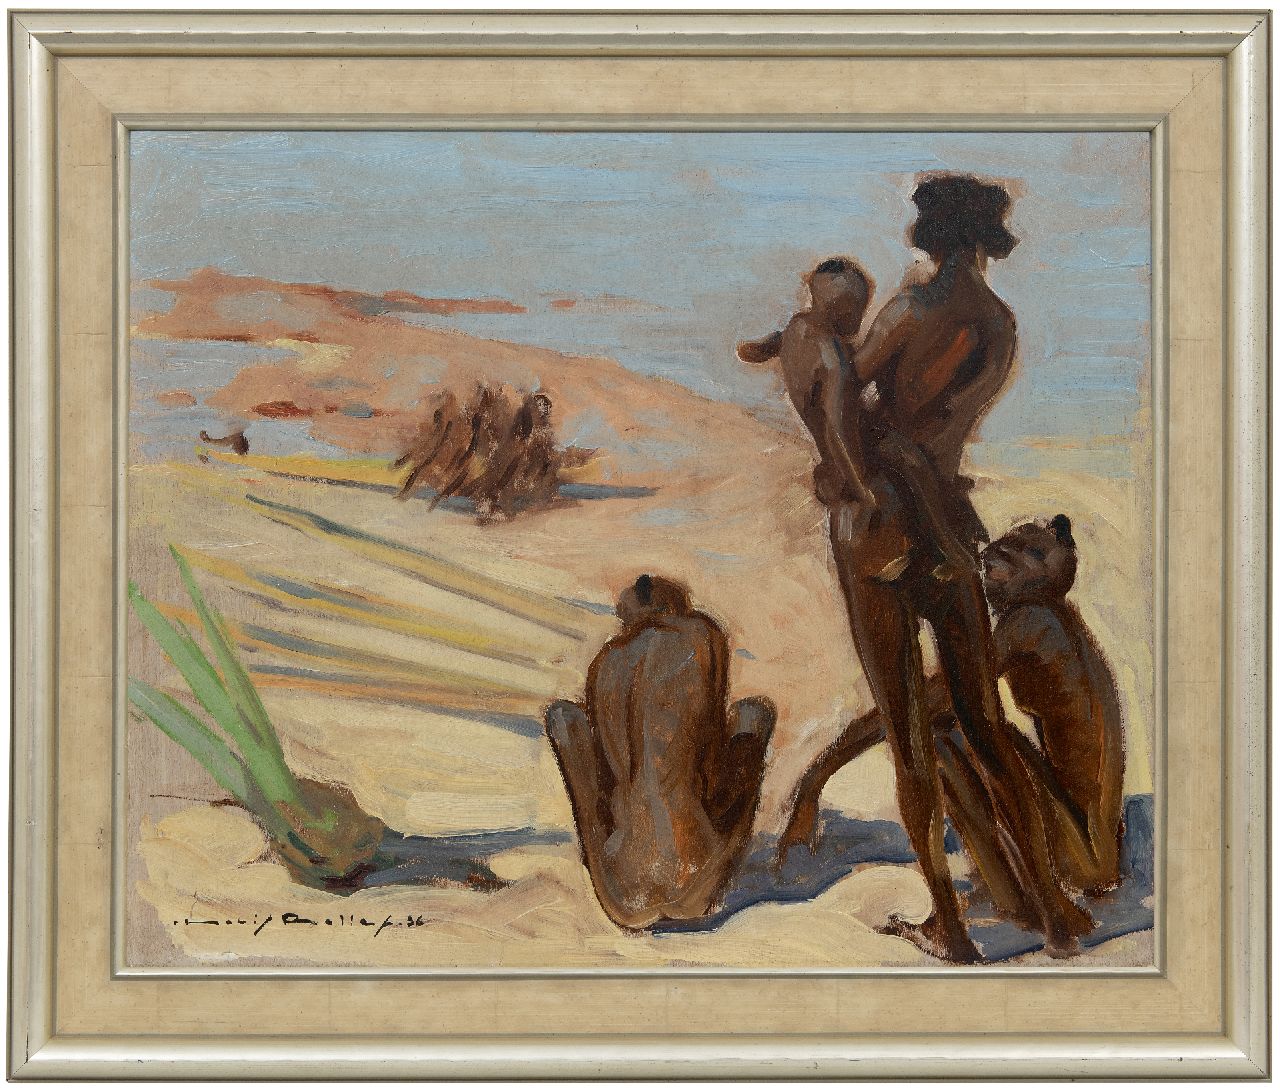 Rollet L.  | Louis Rollet | Paintings offered for sale | Nossi-Bé, Madagascar, oil on panel 50.1 x 61.2 cm, signed l.l. and dated '36